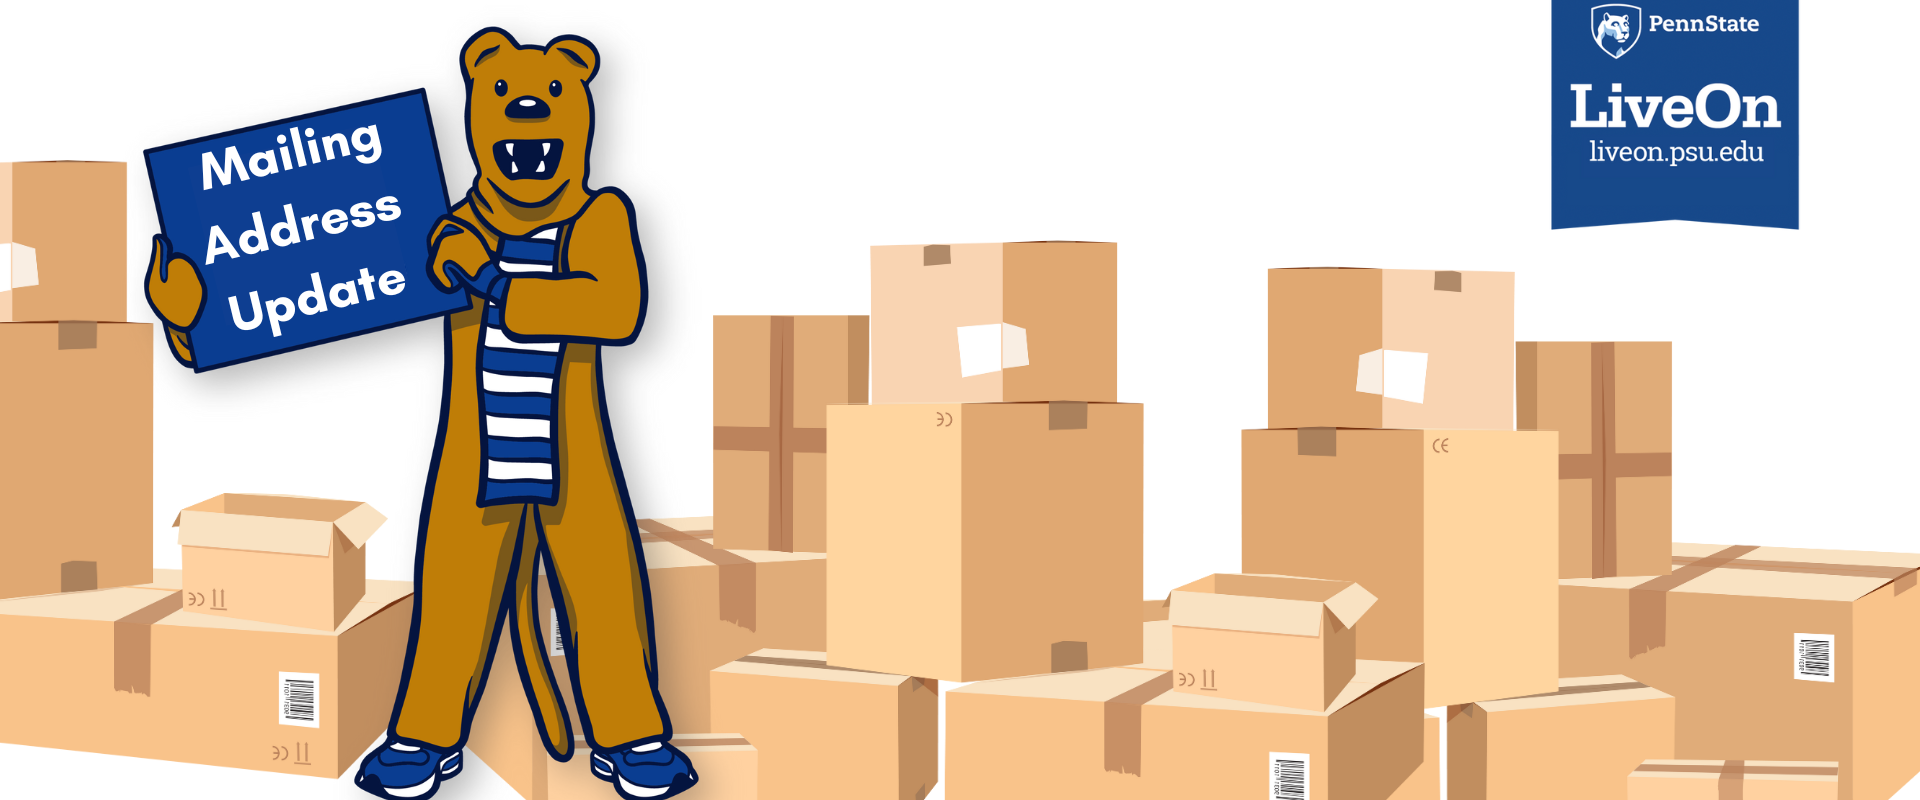 image of Nittany Lion mascot holding a sign that says "Mailing Address Update"